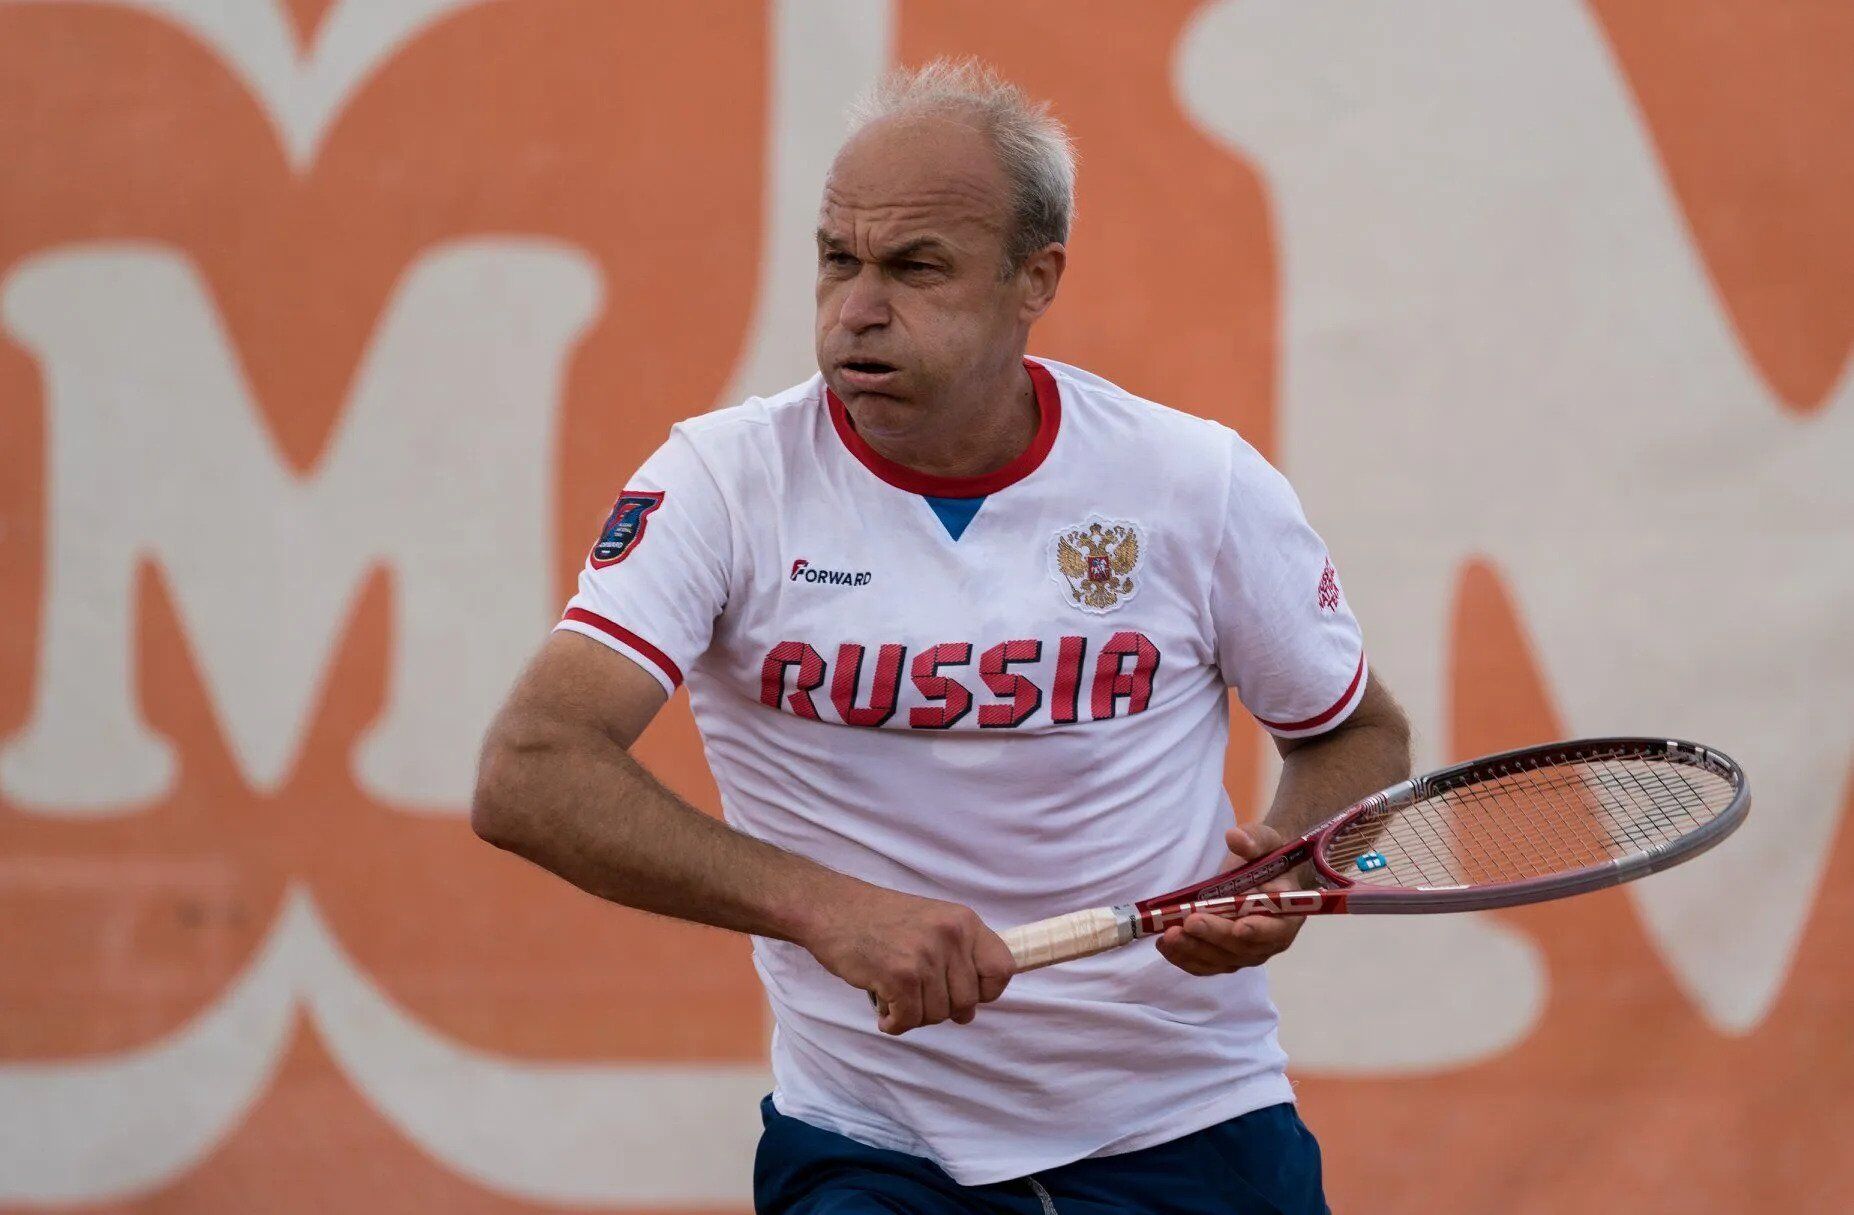 ''Didn’t beat her on her head'': Russia hysterically calls for the suspension of Ukrainian tennis players who put aggressors in their place